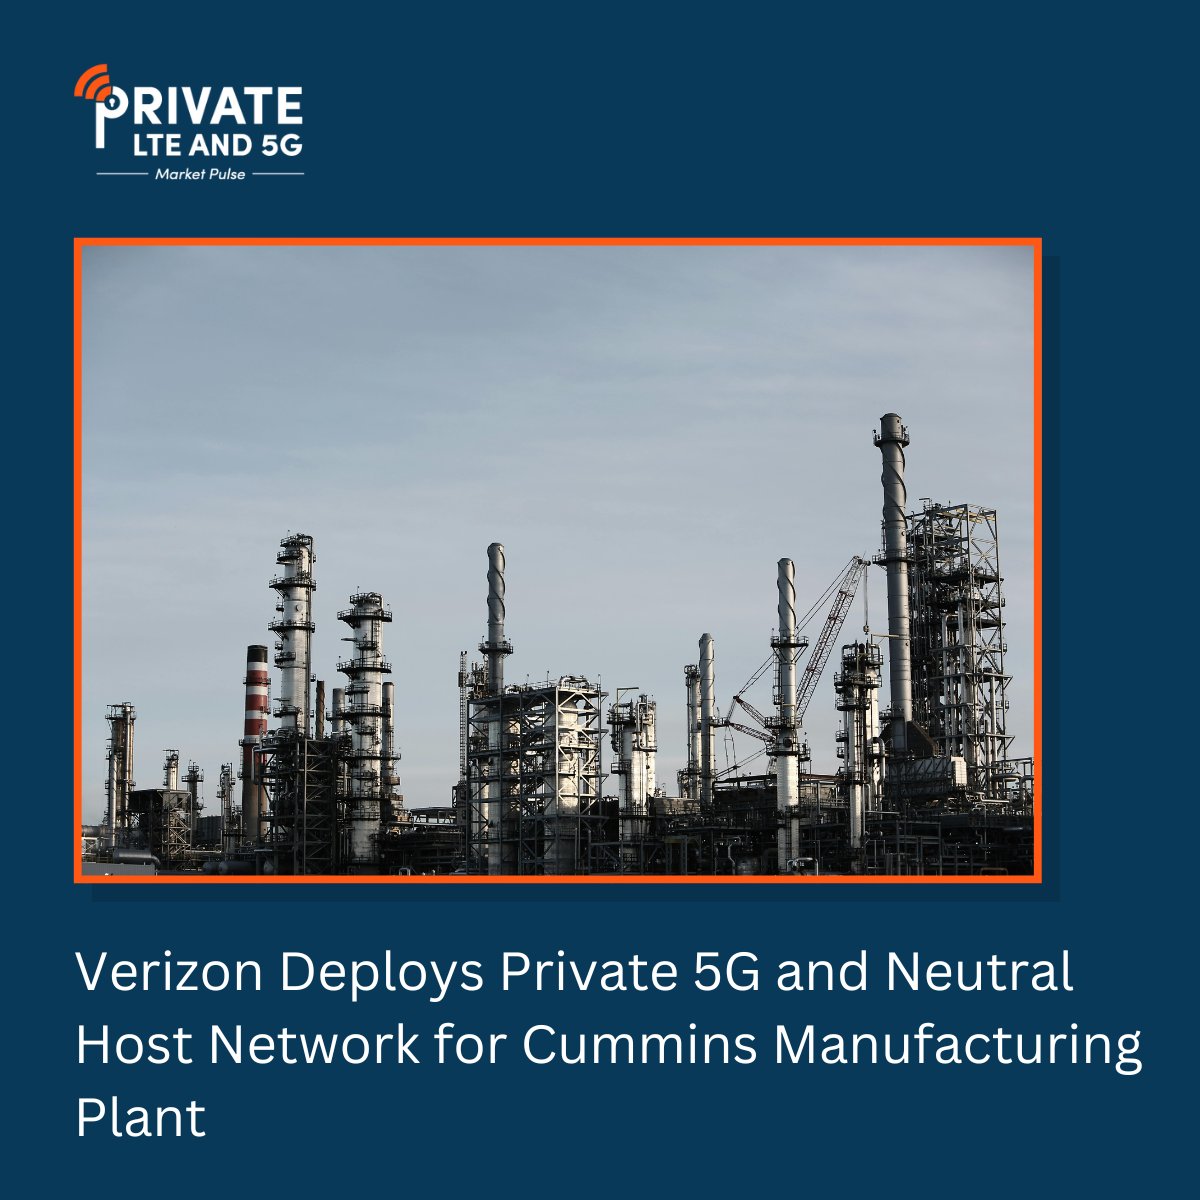 📢New Deployment Alert! 
Deployment at Cummins’ Jamestown Engine Plant in Lakewood, New York marks the first commercial use of Verizon’s new neutral host network product. 
For more: privatelteand5g.com/verizon-deploy…

#privatecellularnetworks  #privatelte #private5g #privatenetworks